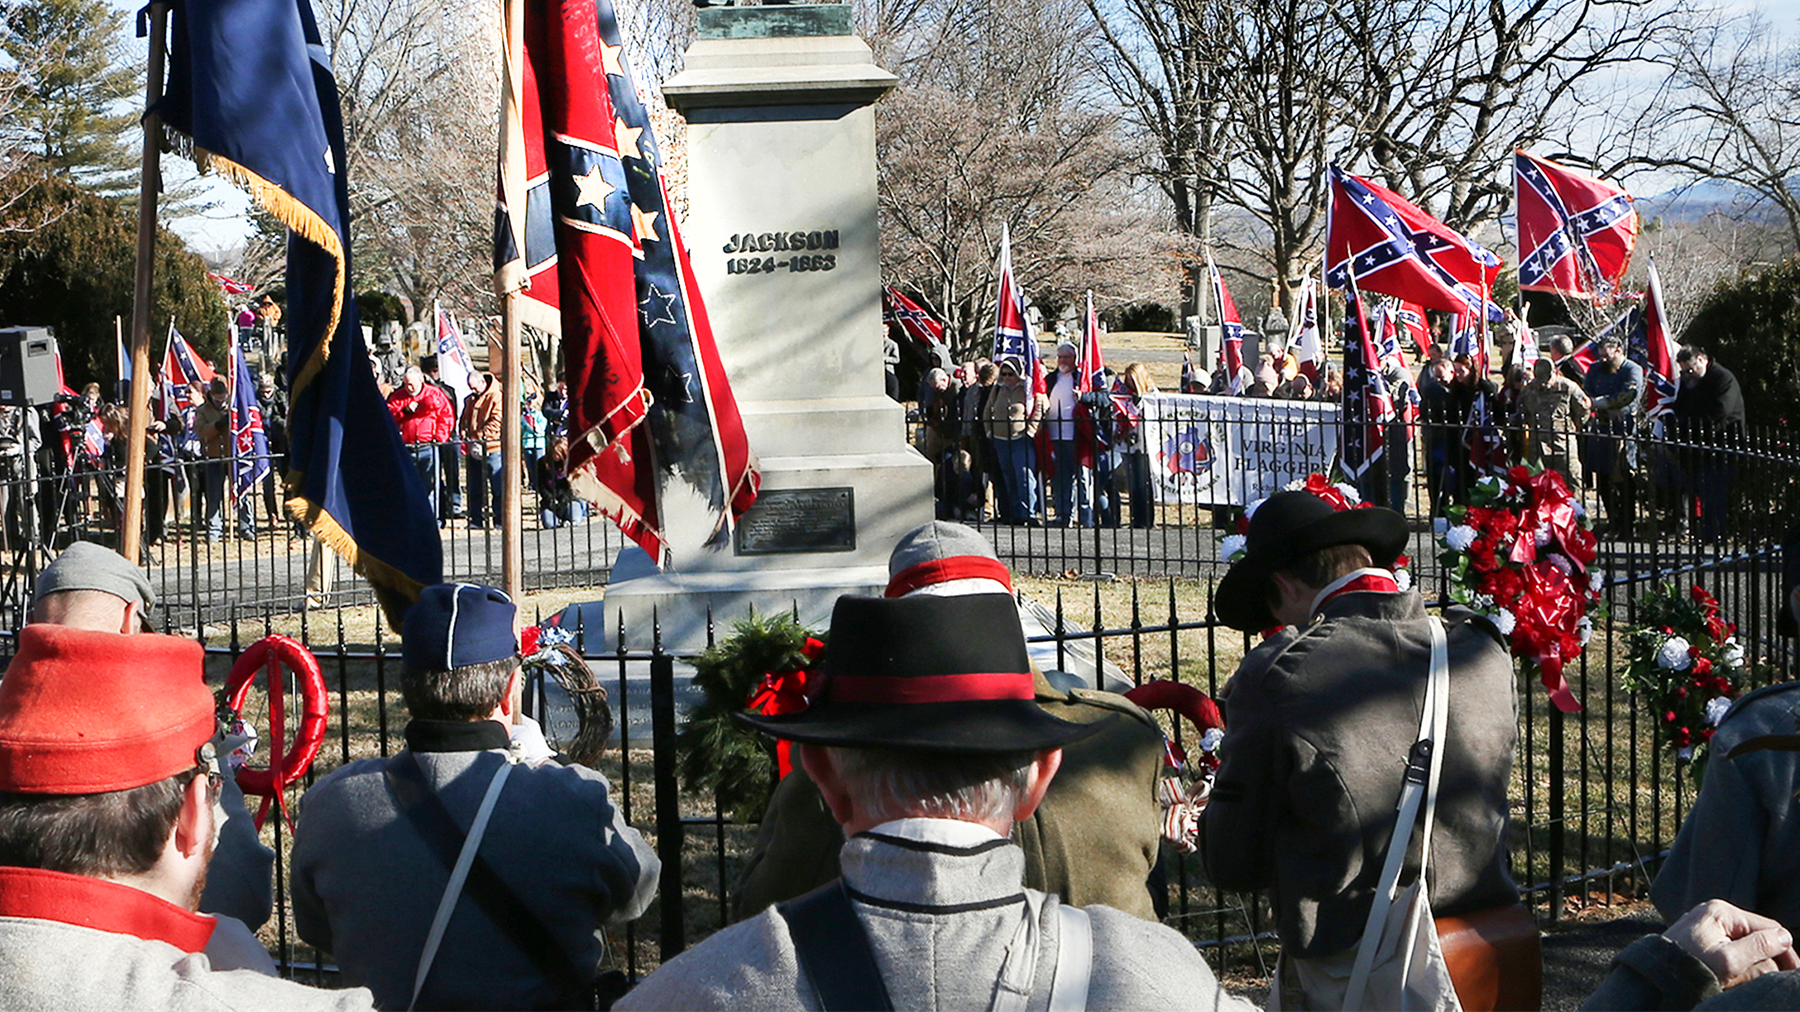 Extremist Groups Plan to Attend Lee-Jackson Day Rally in Virginia |  Southern Poverty Law Center